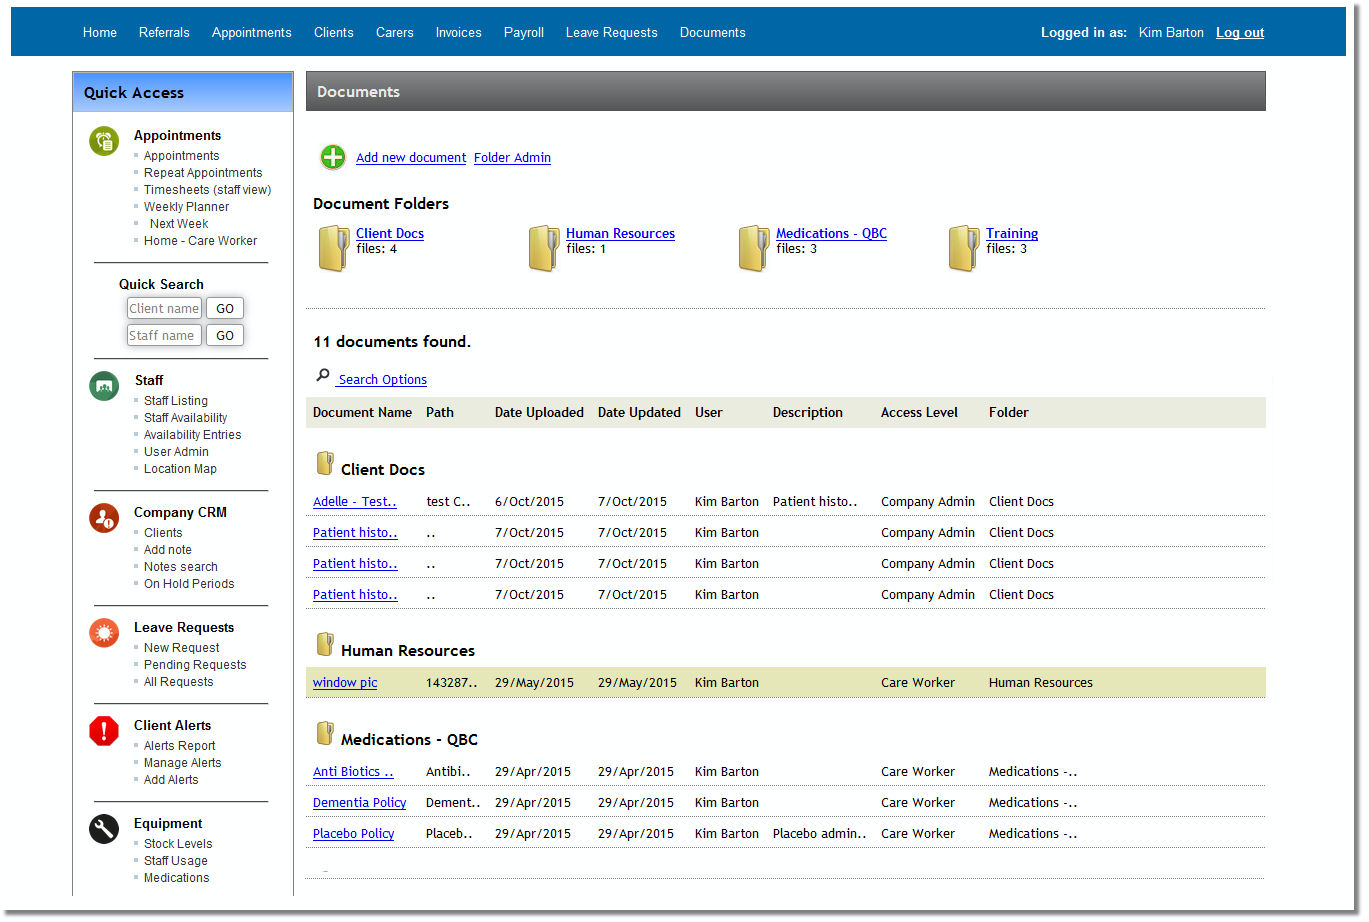 TurnPoint Software - Utilize centralized depositary for company documents